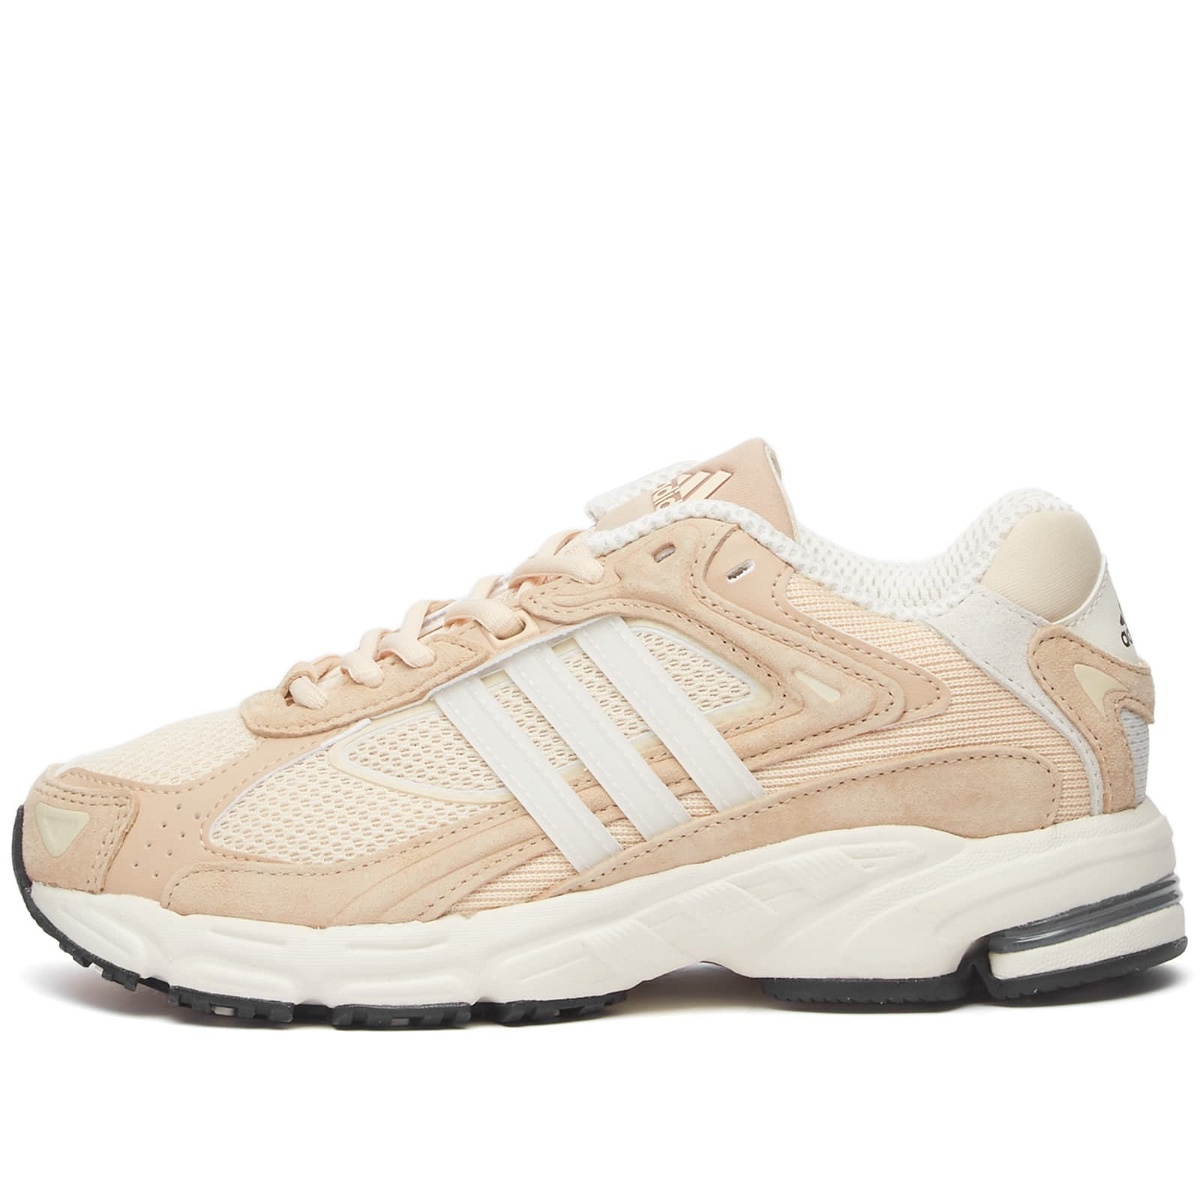 Adidas Response CL Sneakers in Sand/Off White/Beige adidas | 